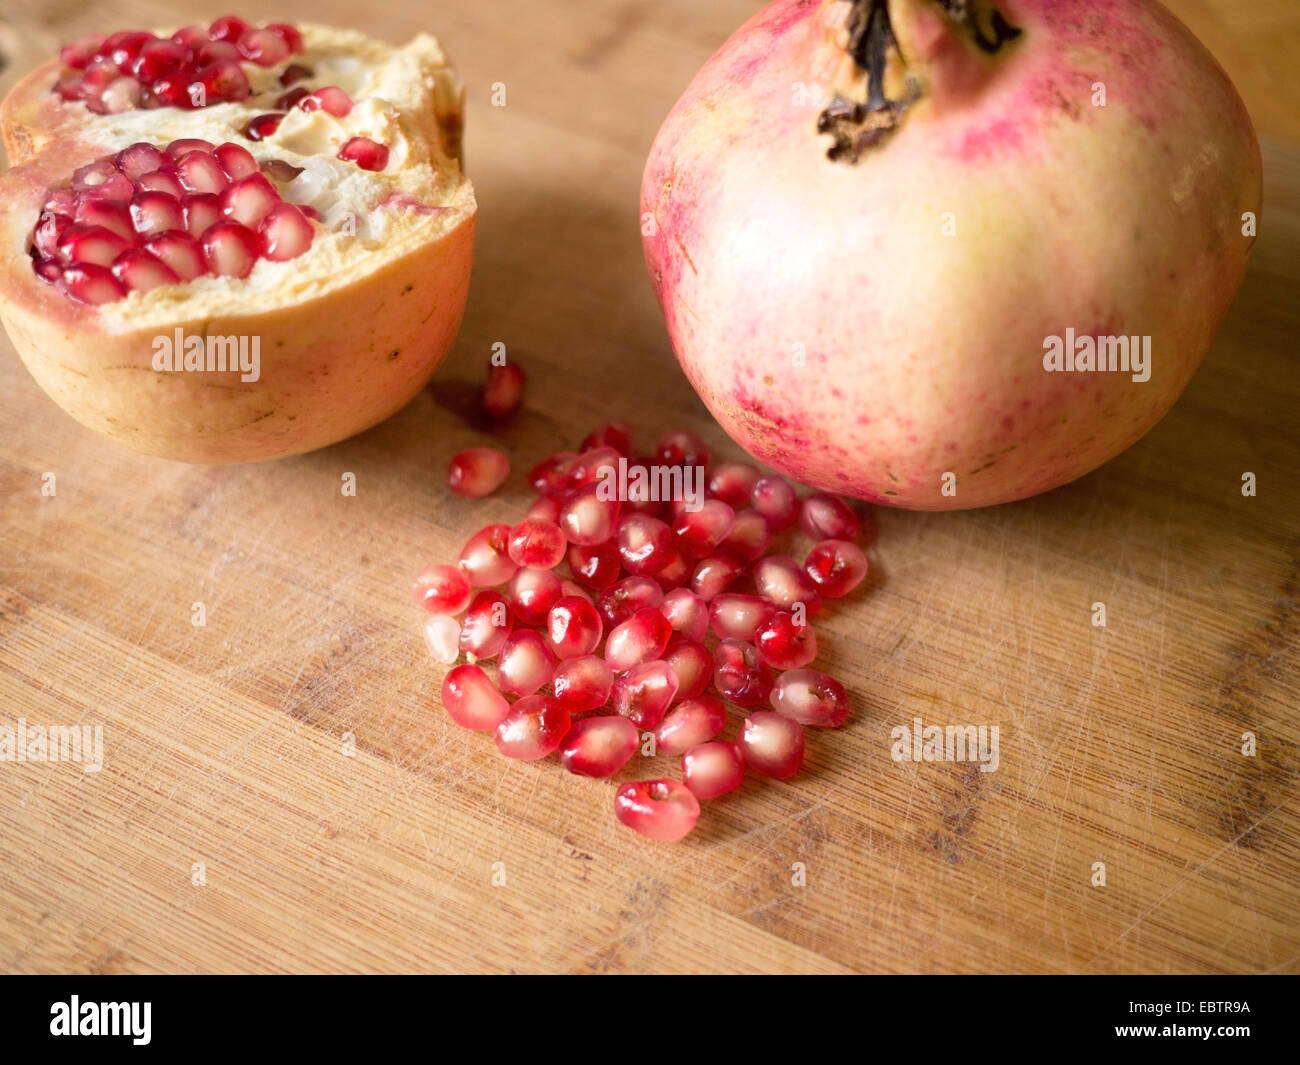 Pomegranate fruit on wooden board close up Stock Photo